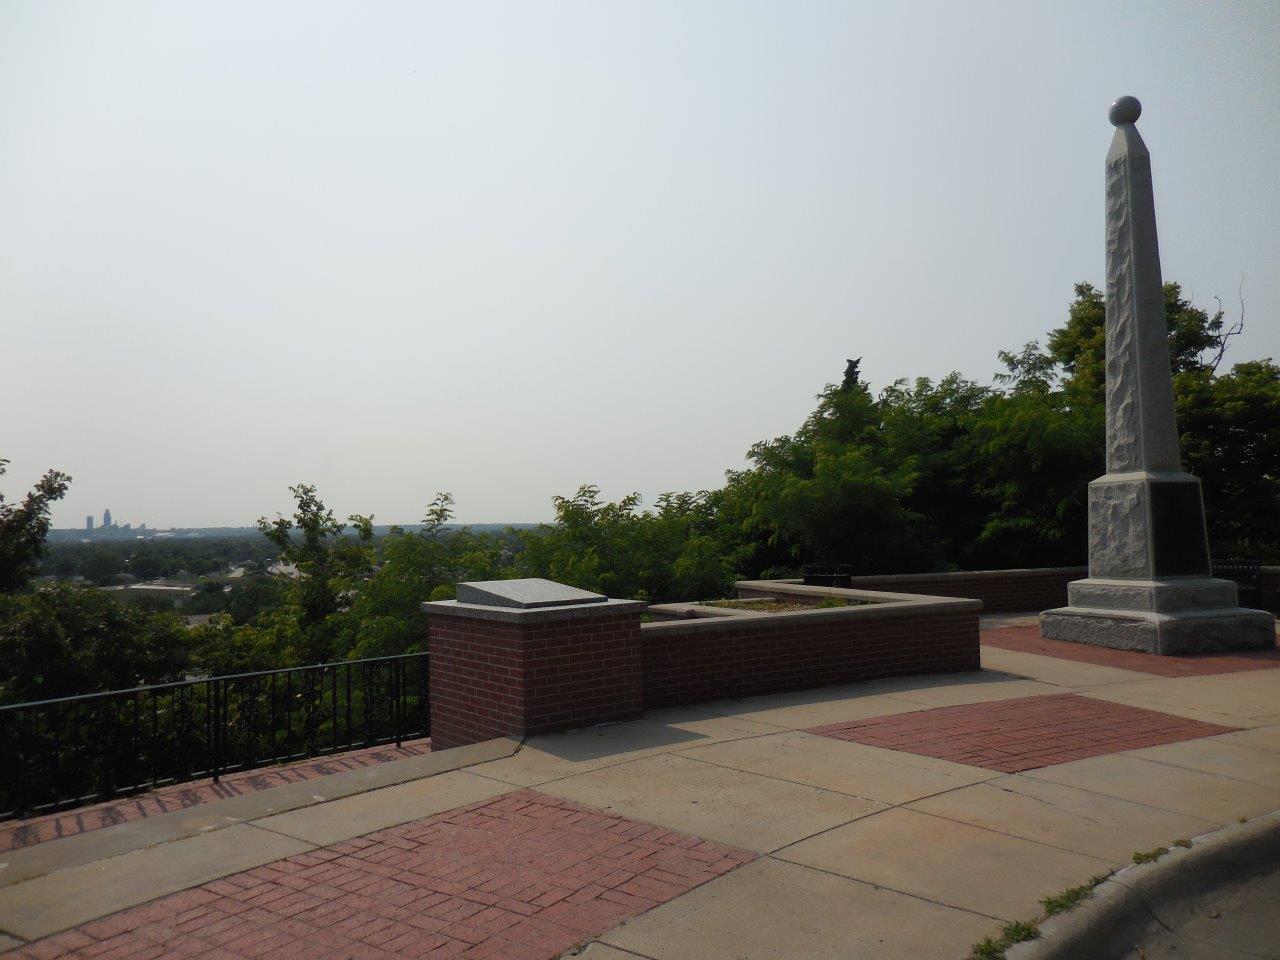 Abraham Lincoln monument marking eastern terminus of Transcontinental railroad